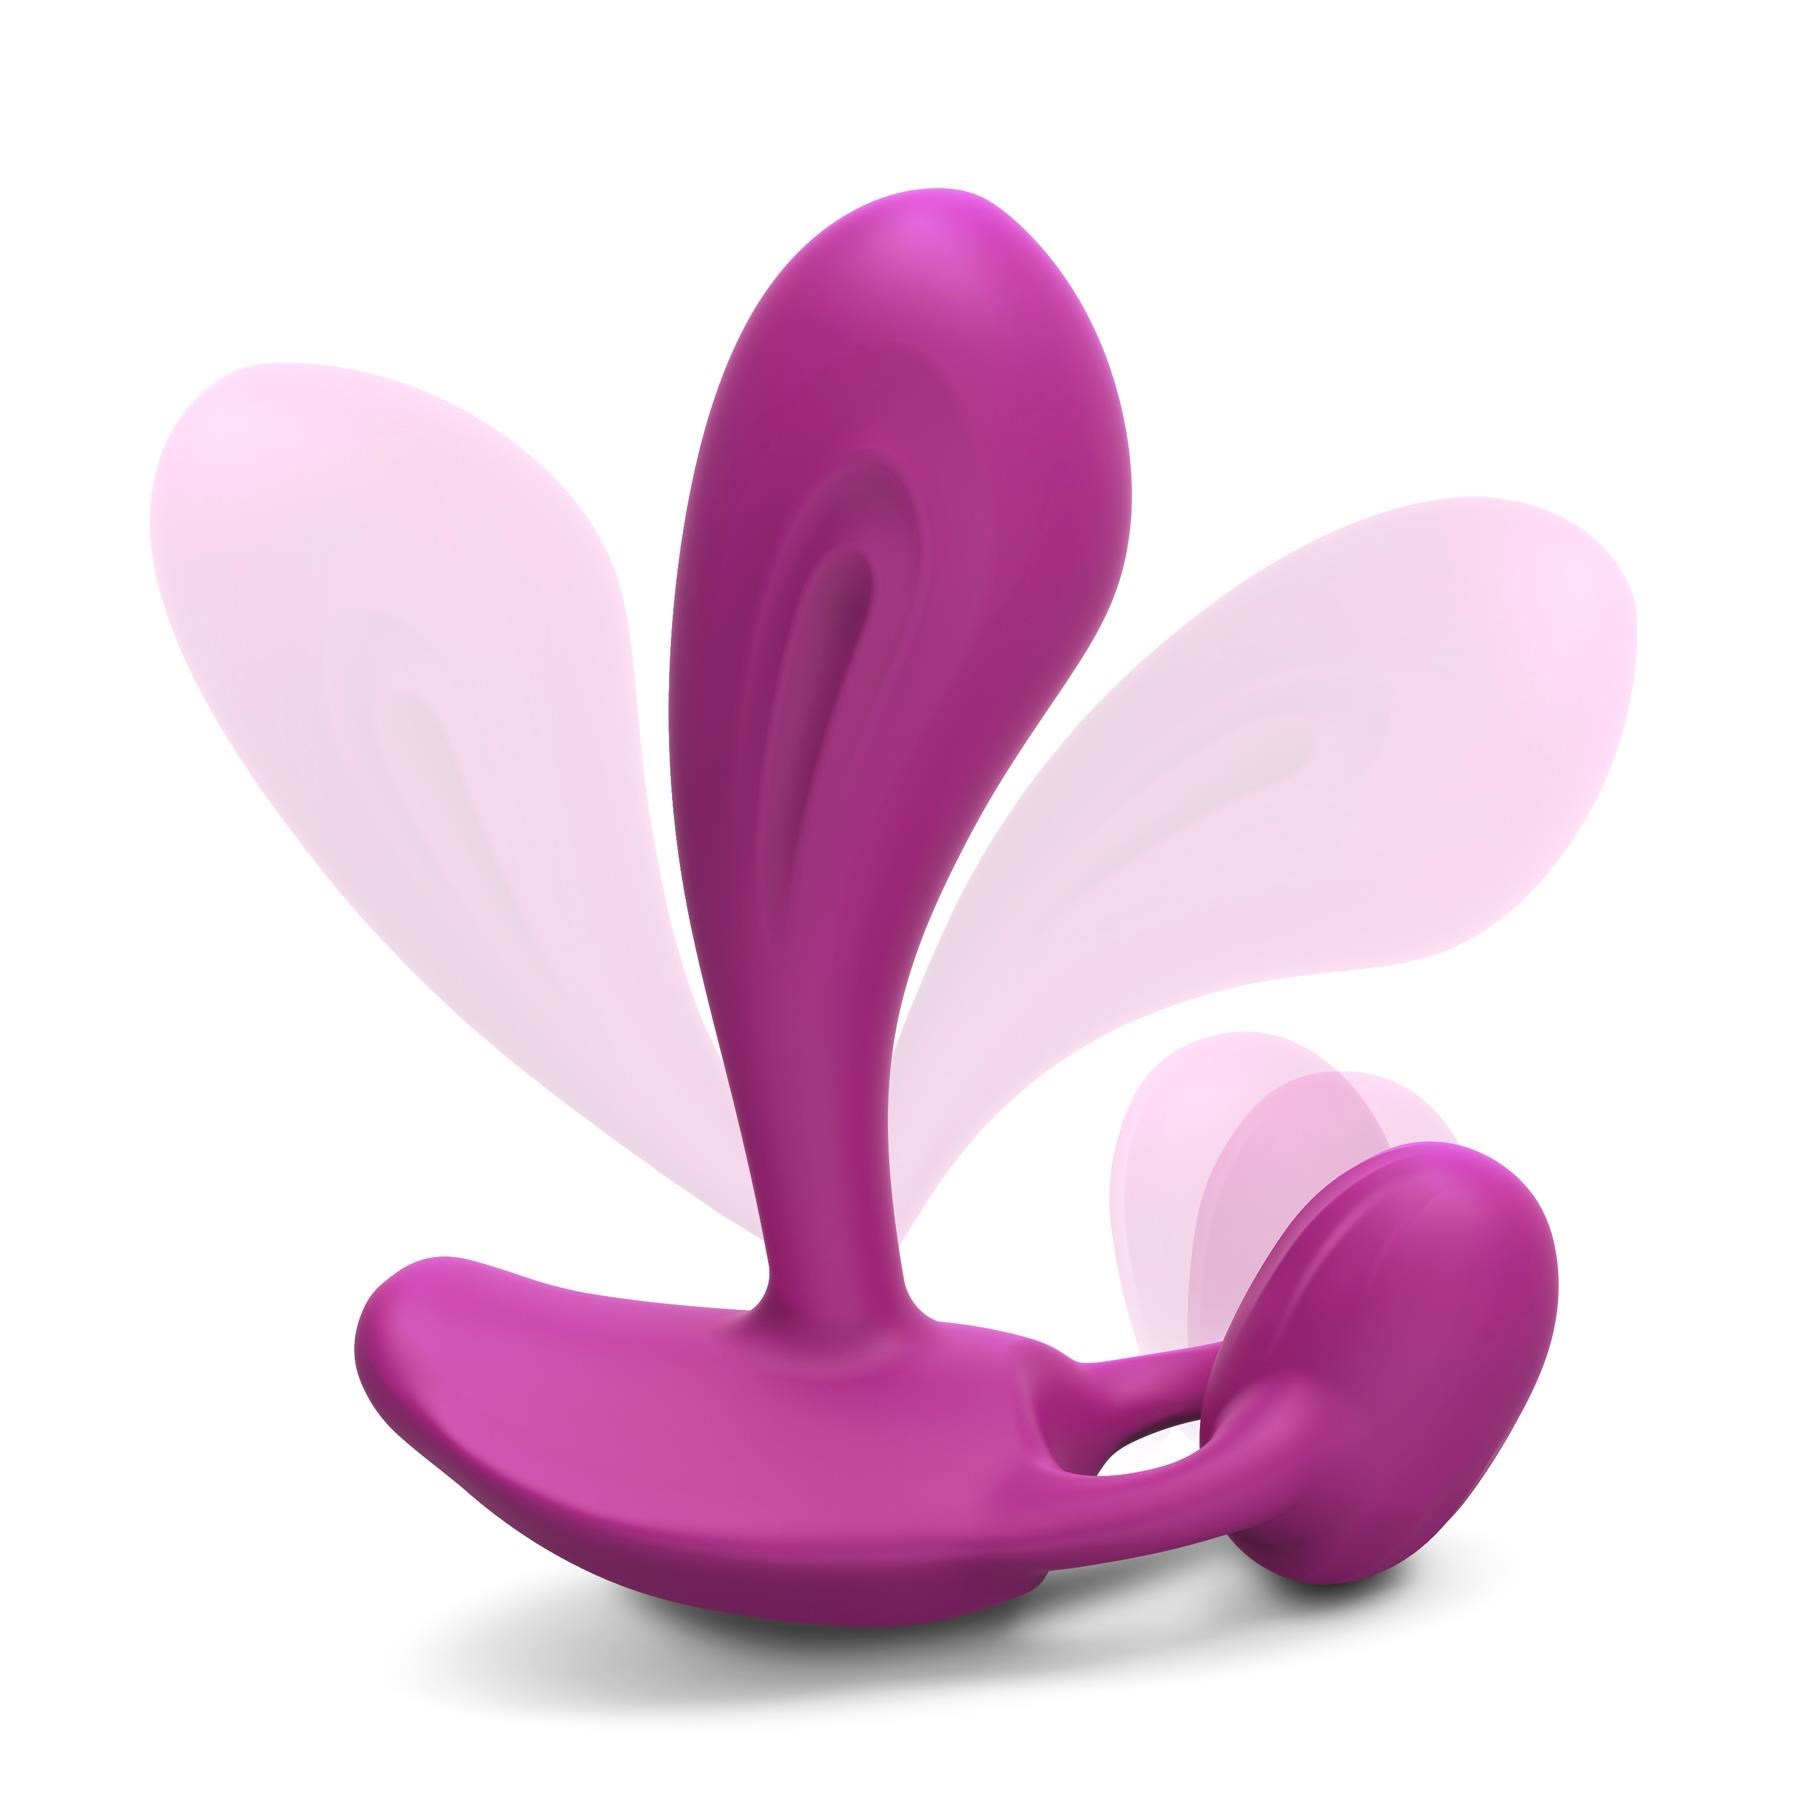 Witty Dual Stimulating Massager With Remote Control - Showing Flexibility